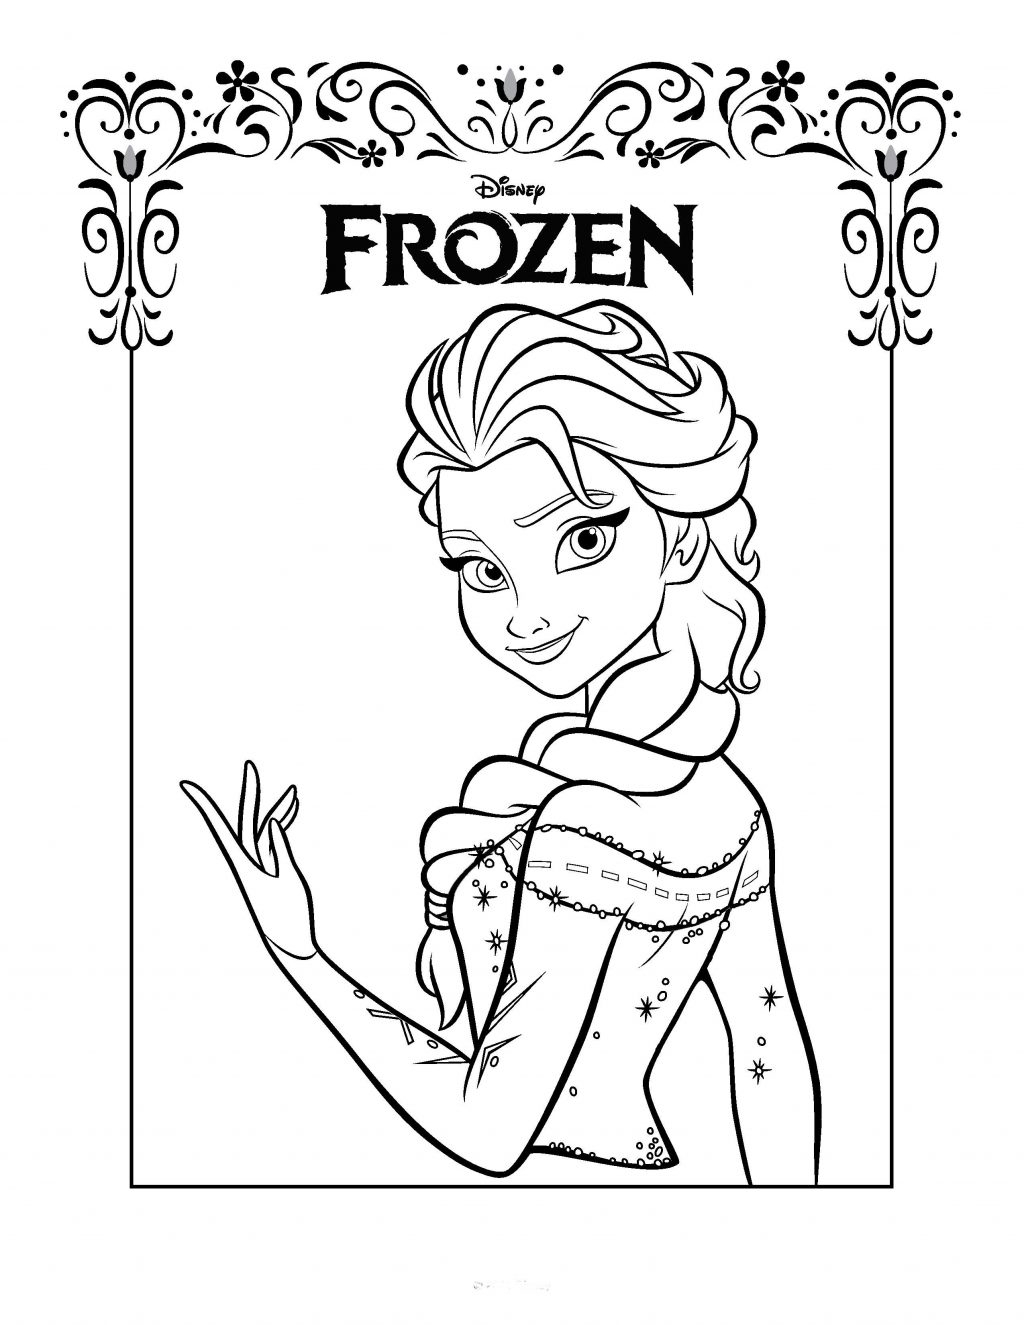 Coloring Pages ~ Printable Frozen Coloring Pages Tldregistry Info - Free Printable Frozen Coloring Pages